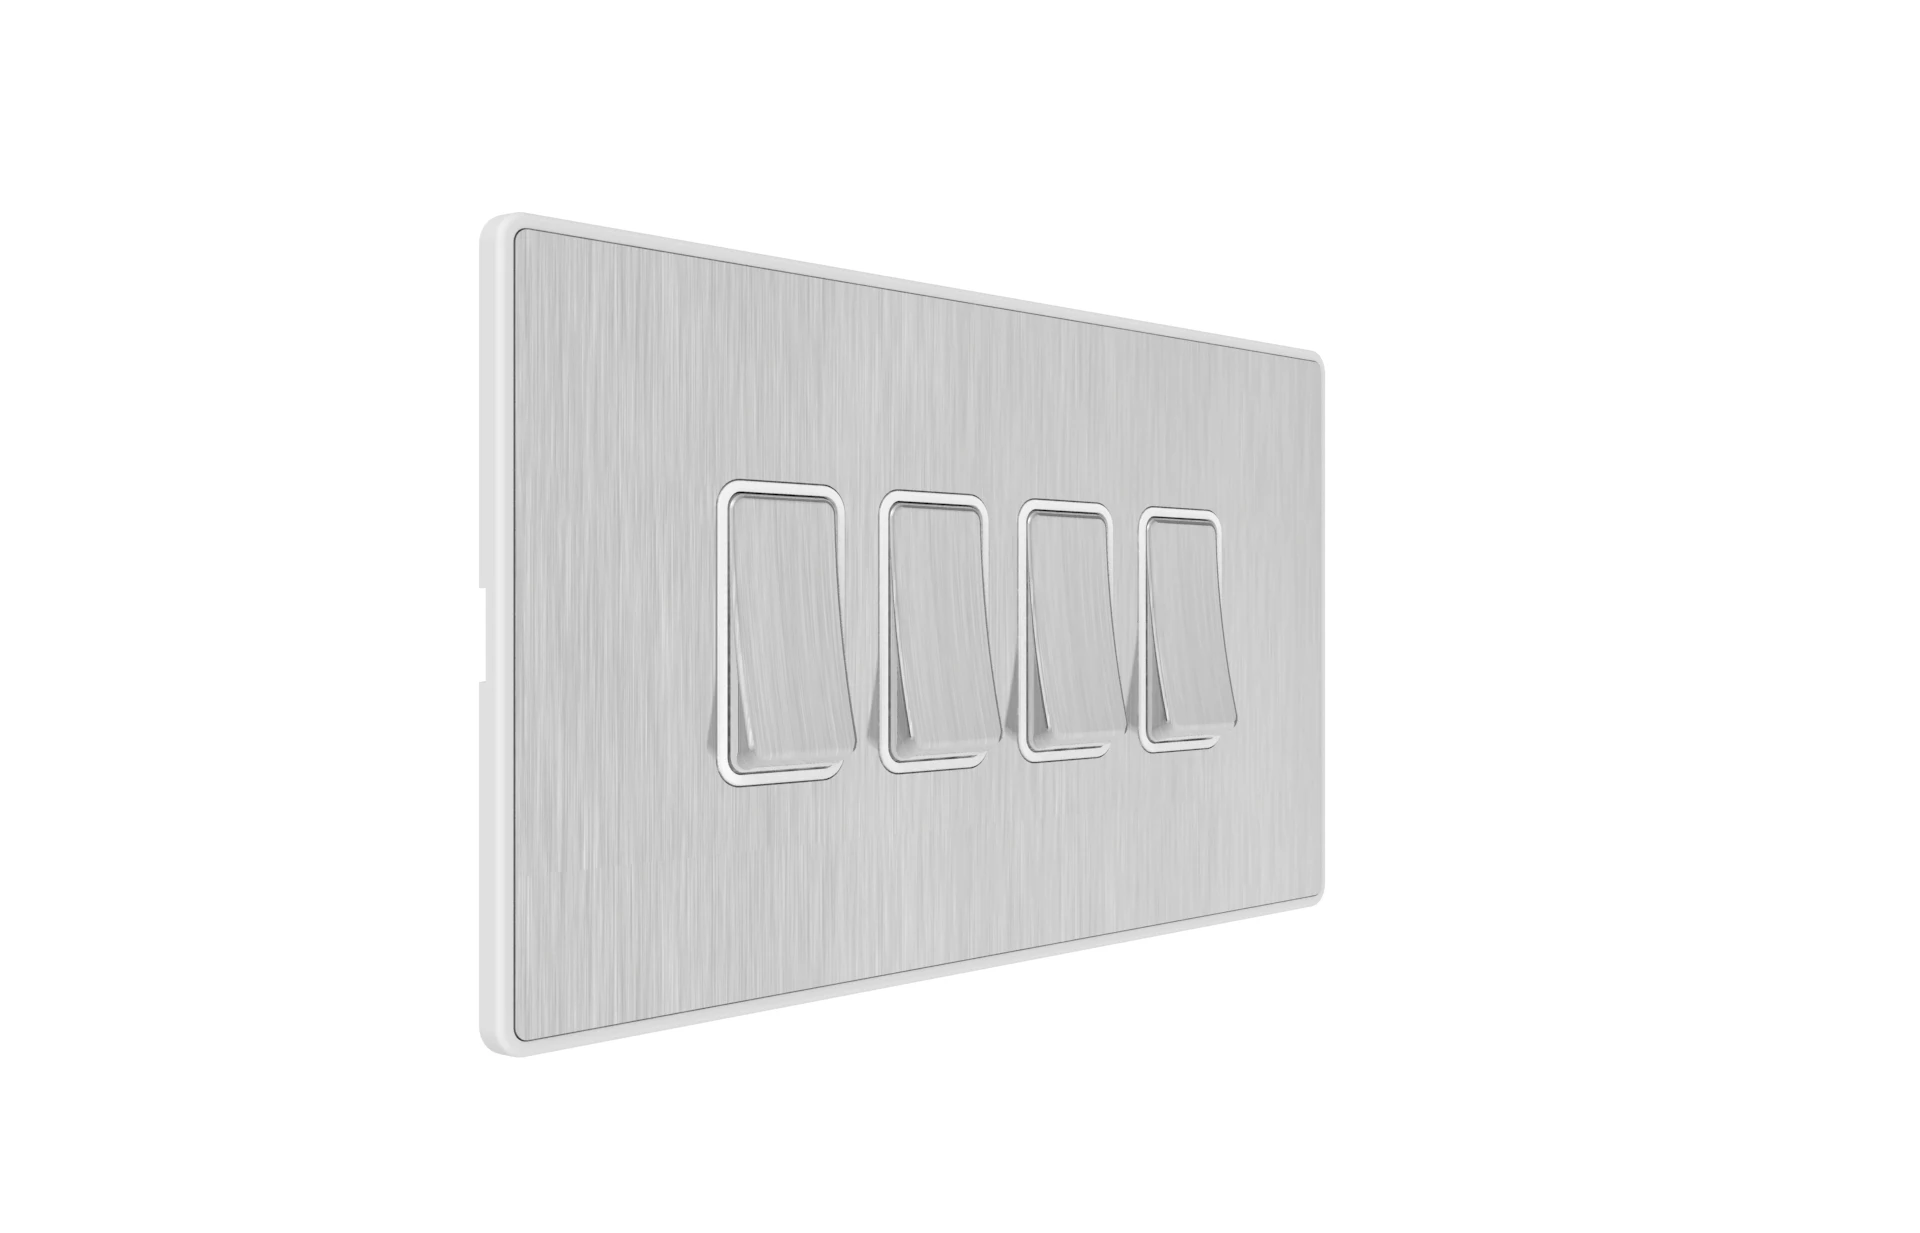 Stainless steel 10 A british standard 4gang uk thin wall switch